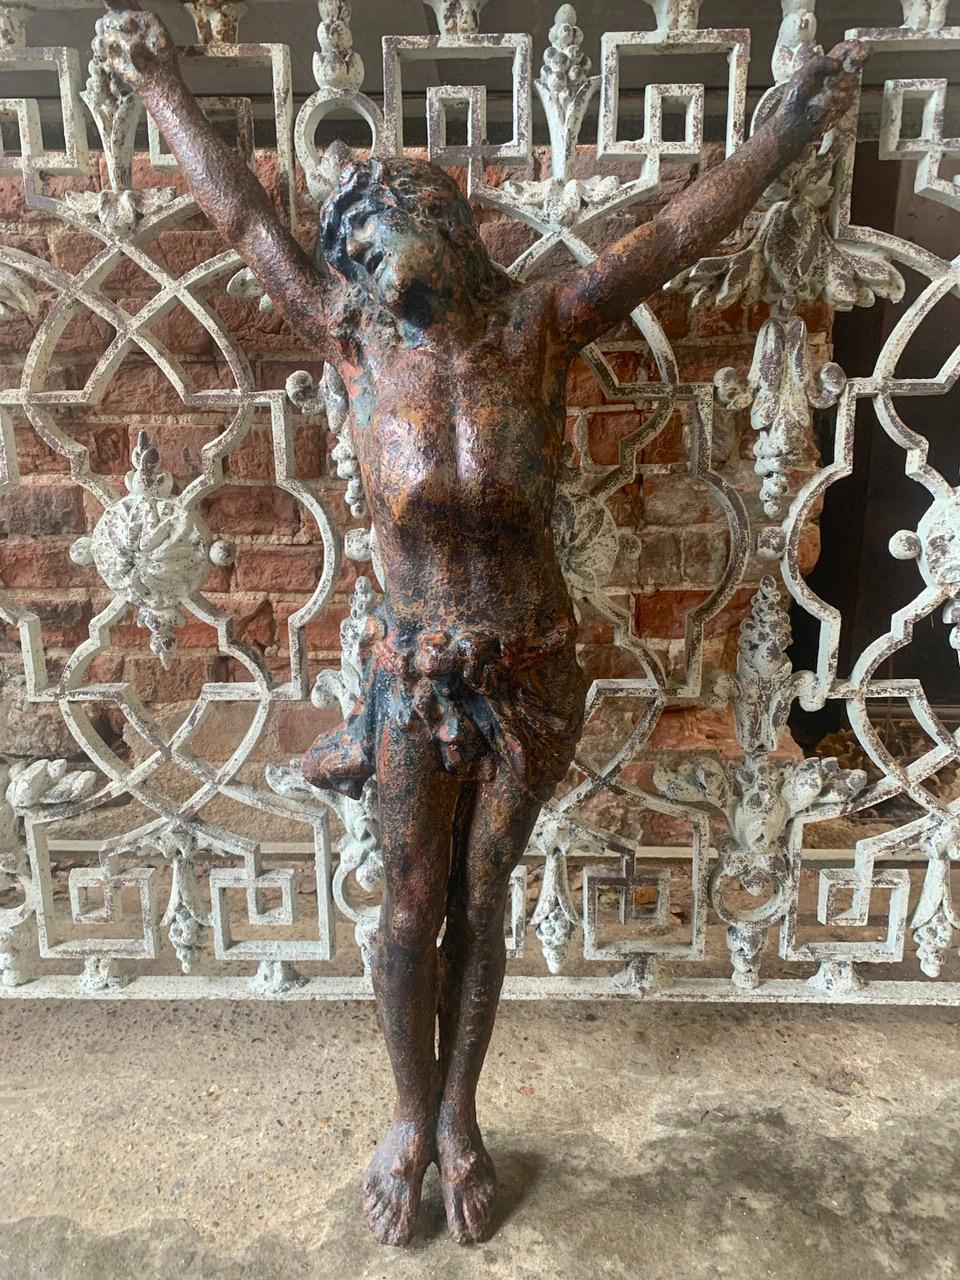 A nice quality 19th century Jesus Christ Corpus made from very heavy cast iron. The iron has a wonderful patina of old paint and rust from being outside for many years. A great decorative piece.
Please contact us for a worldwide shipping quote.